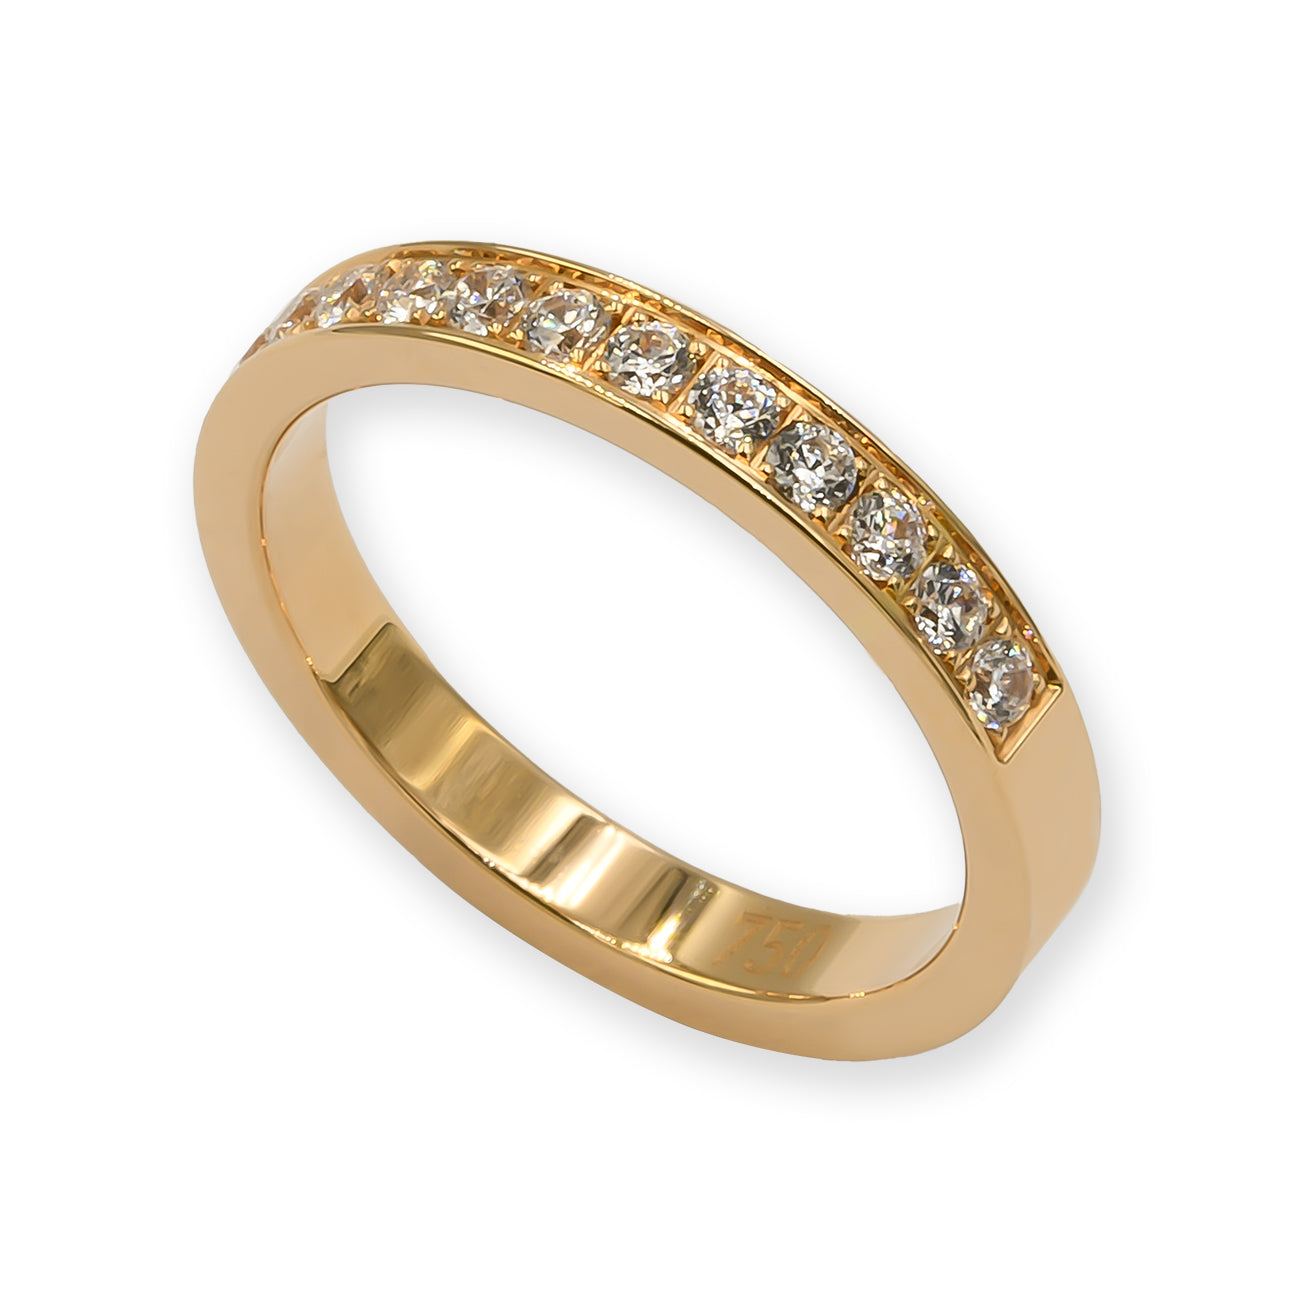 Ring EARTH IS ROUND 3mm yellow gold 18k 15x diamonds VS